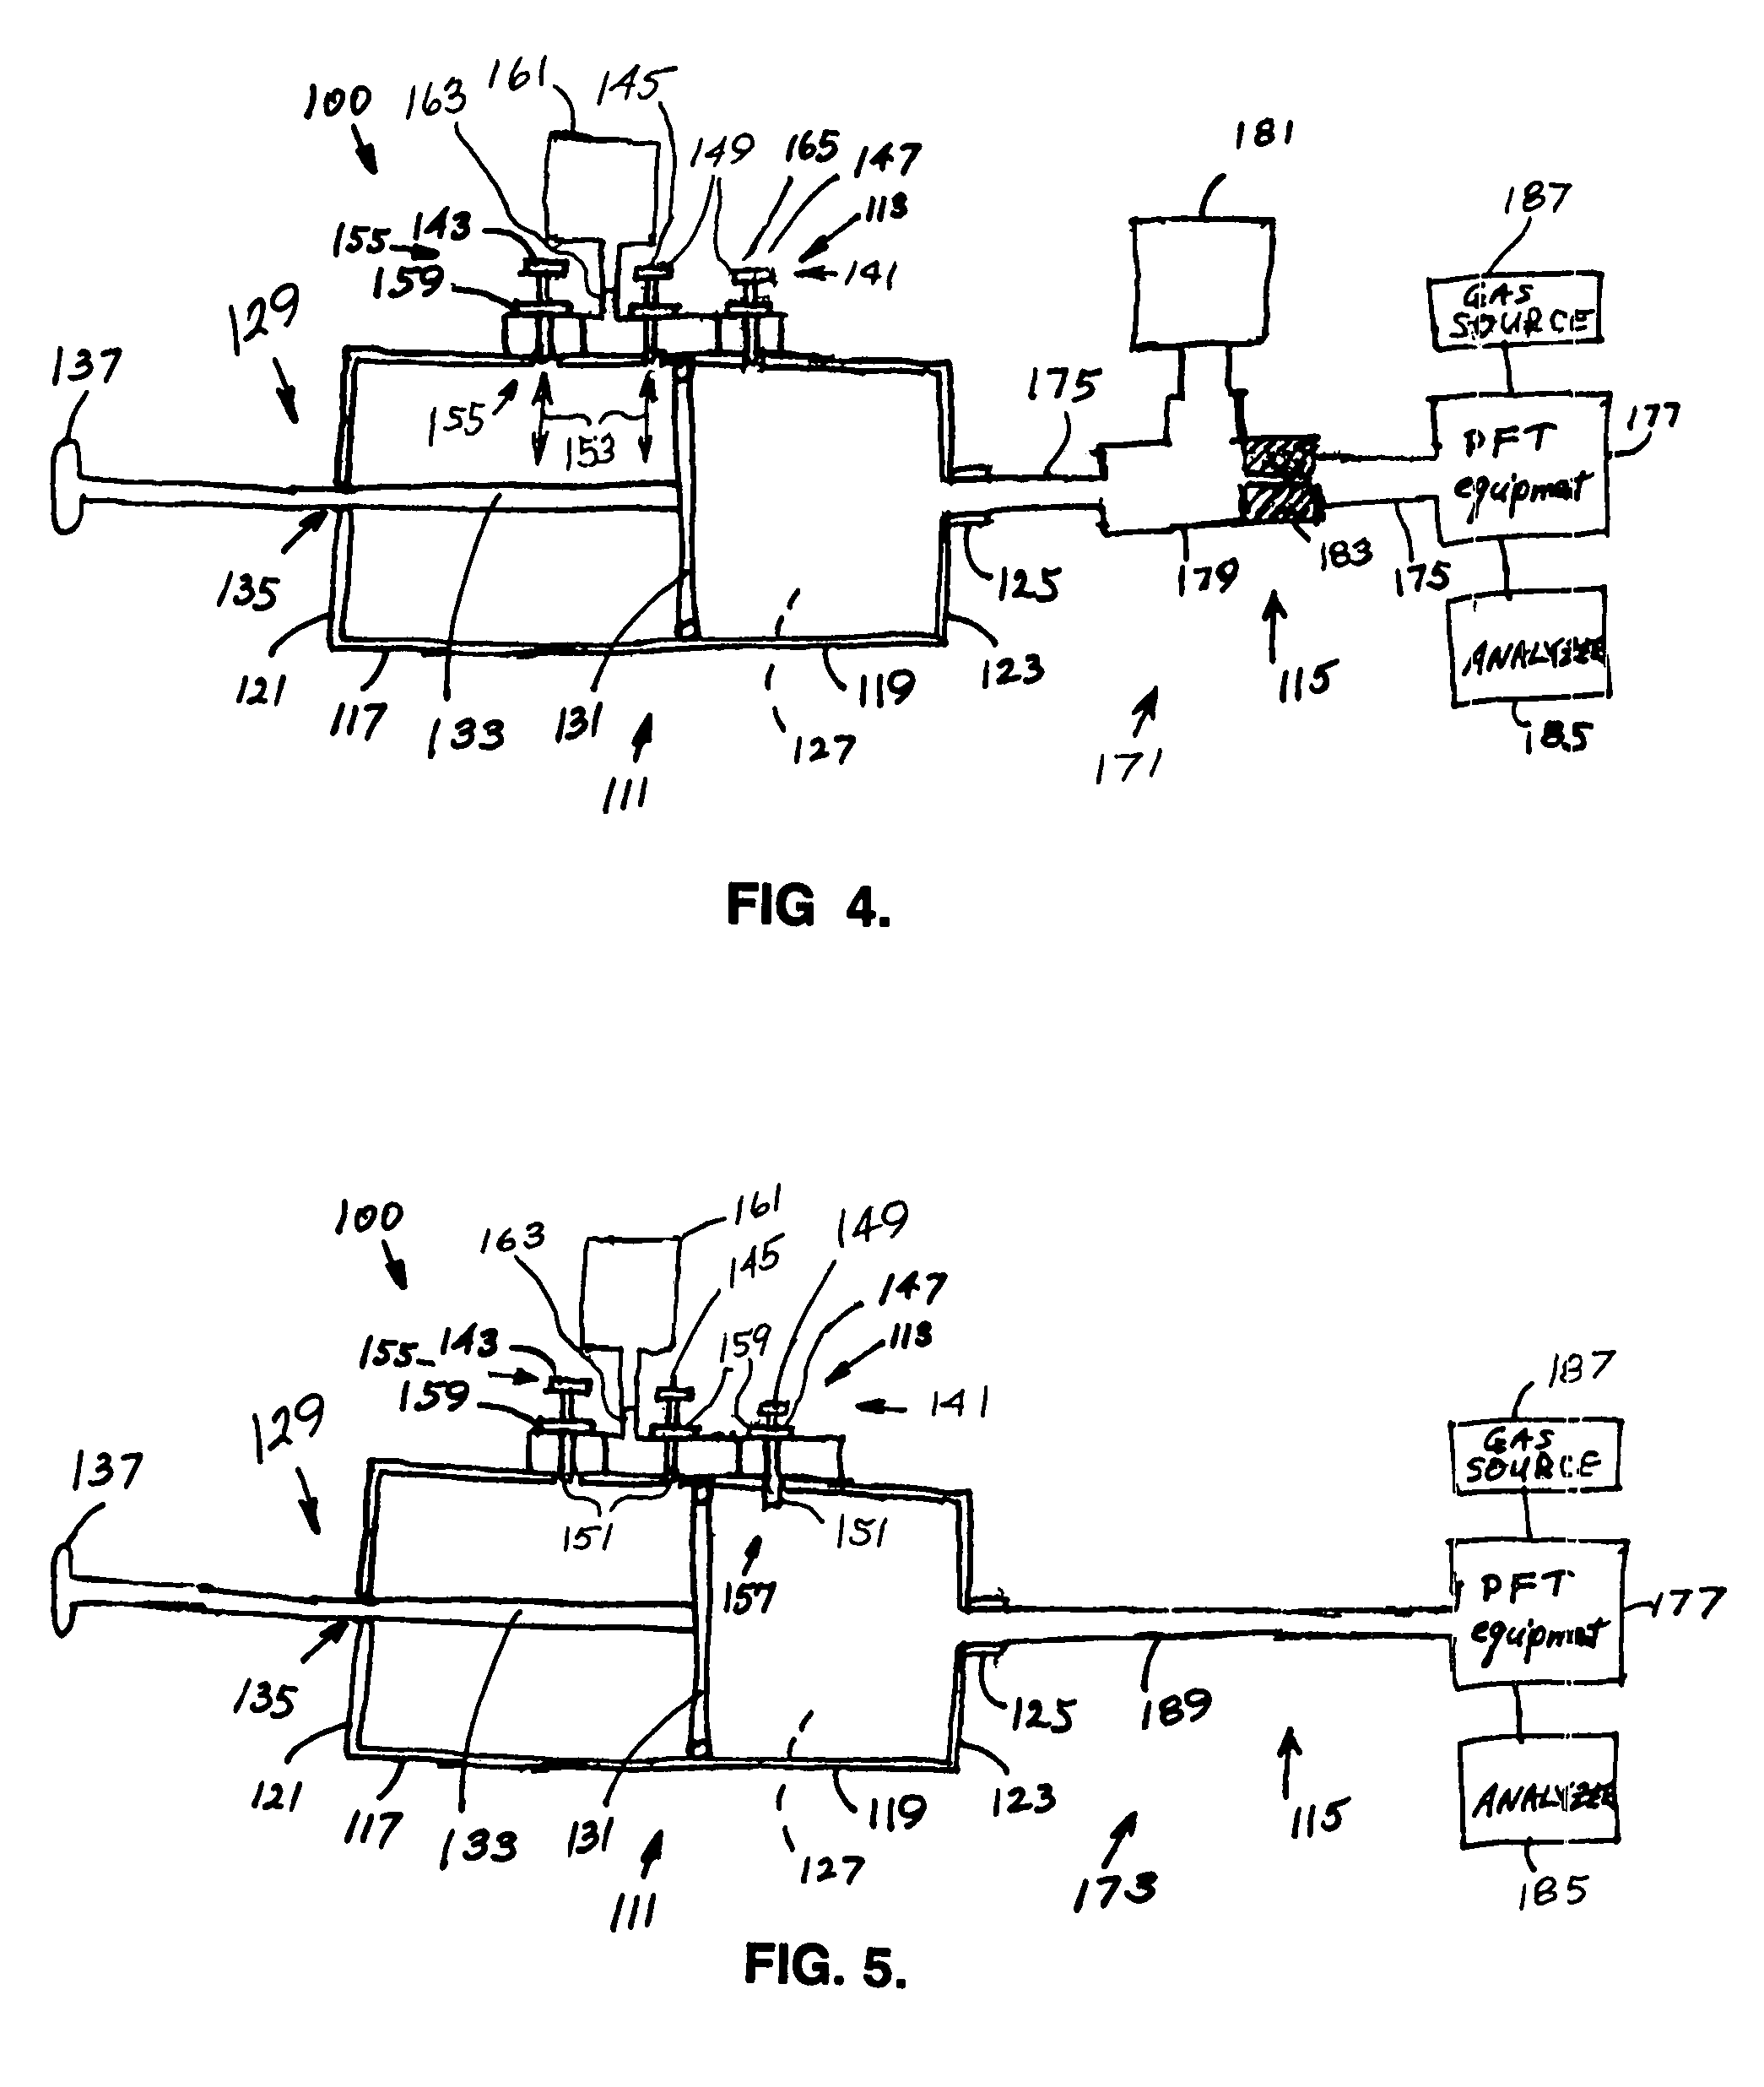 Pulmonary function test calibration system and method